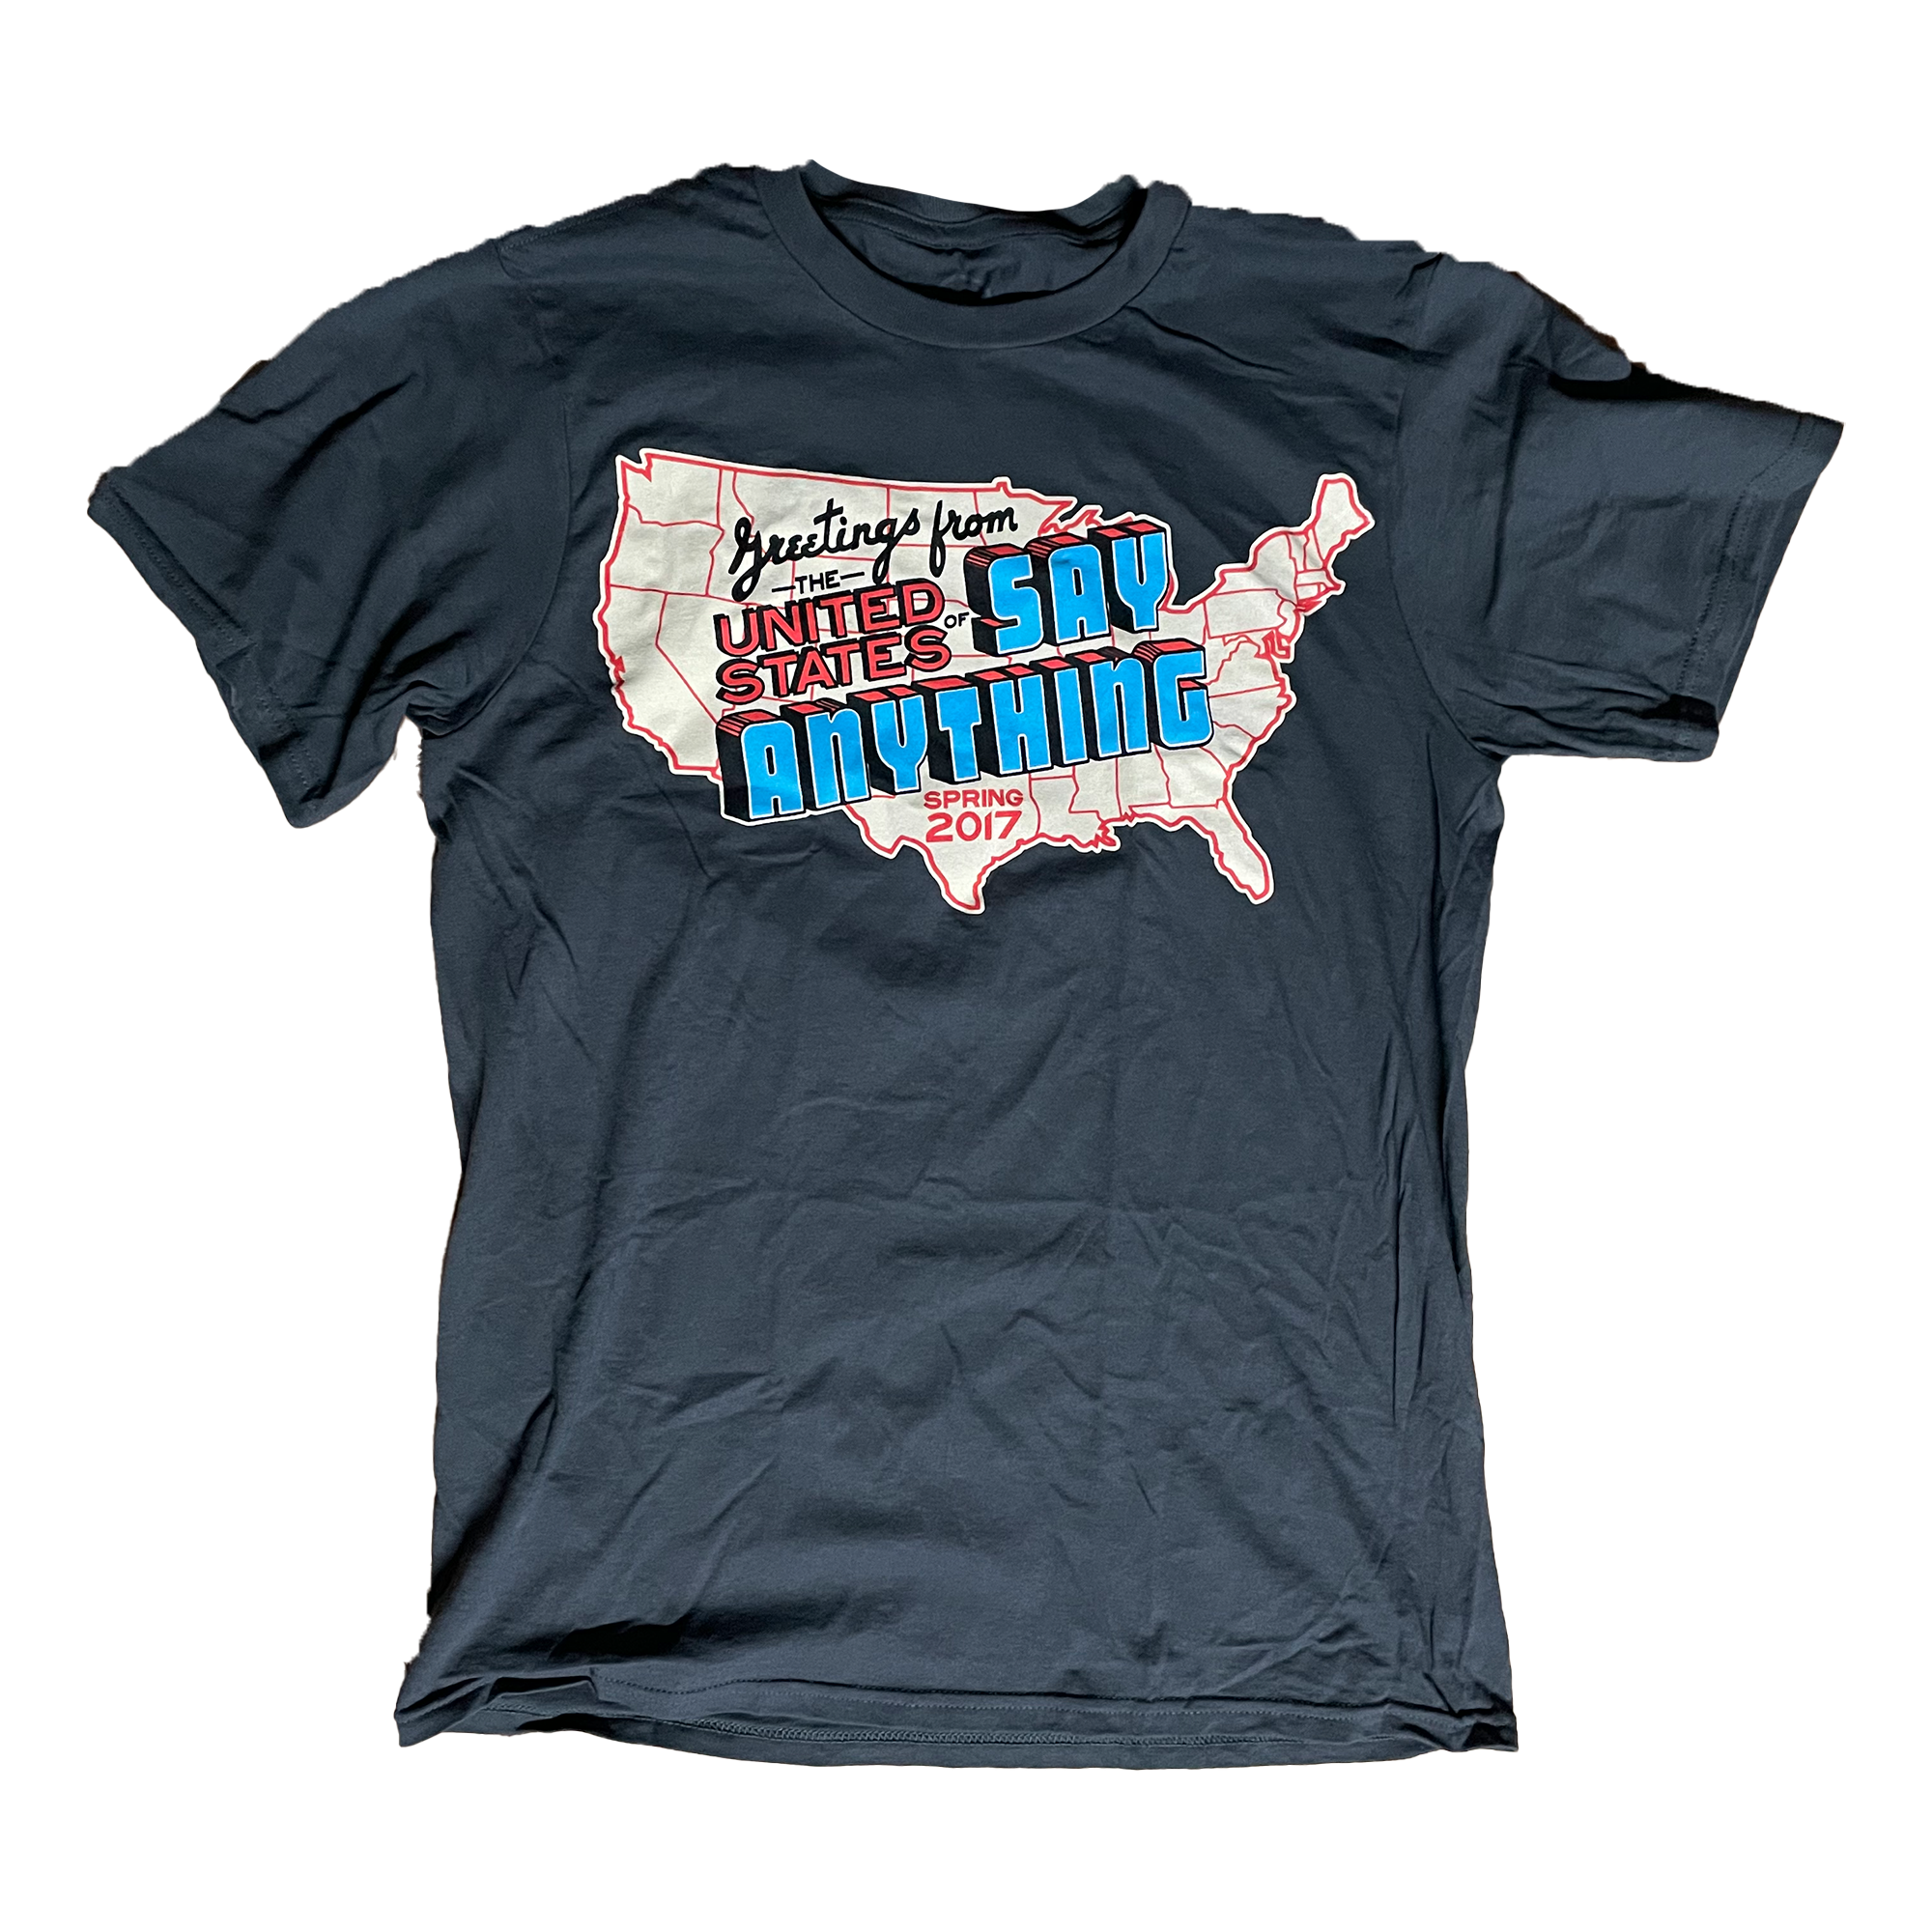 Say Anything - Greetings From.. Tour 2017 Shirt